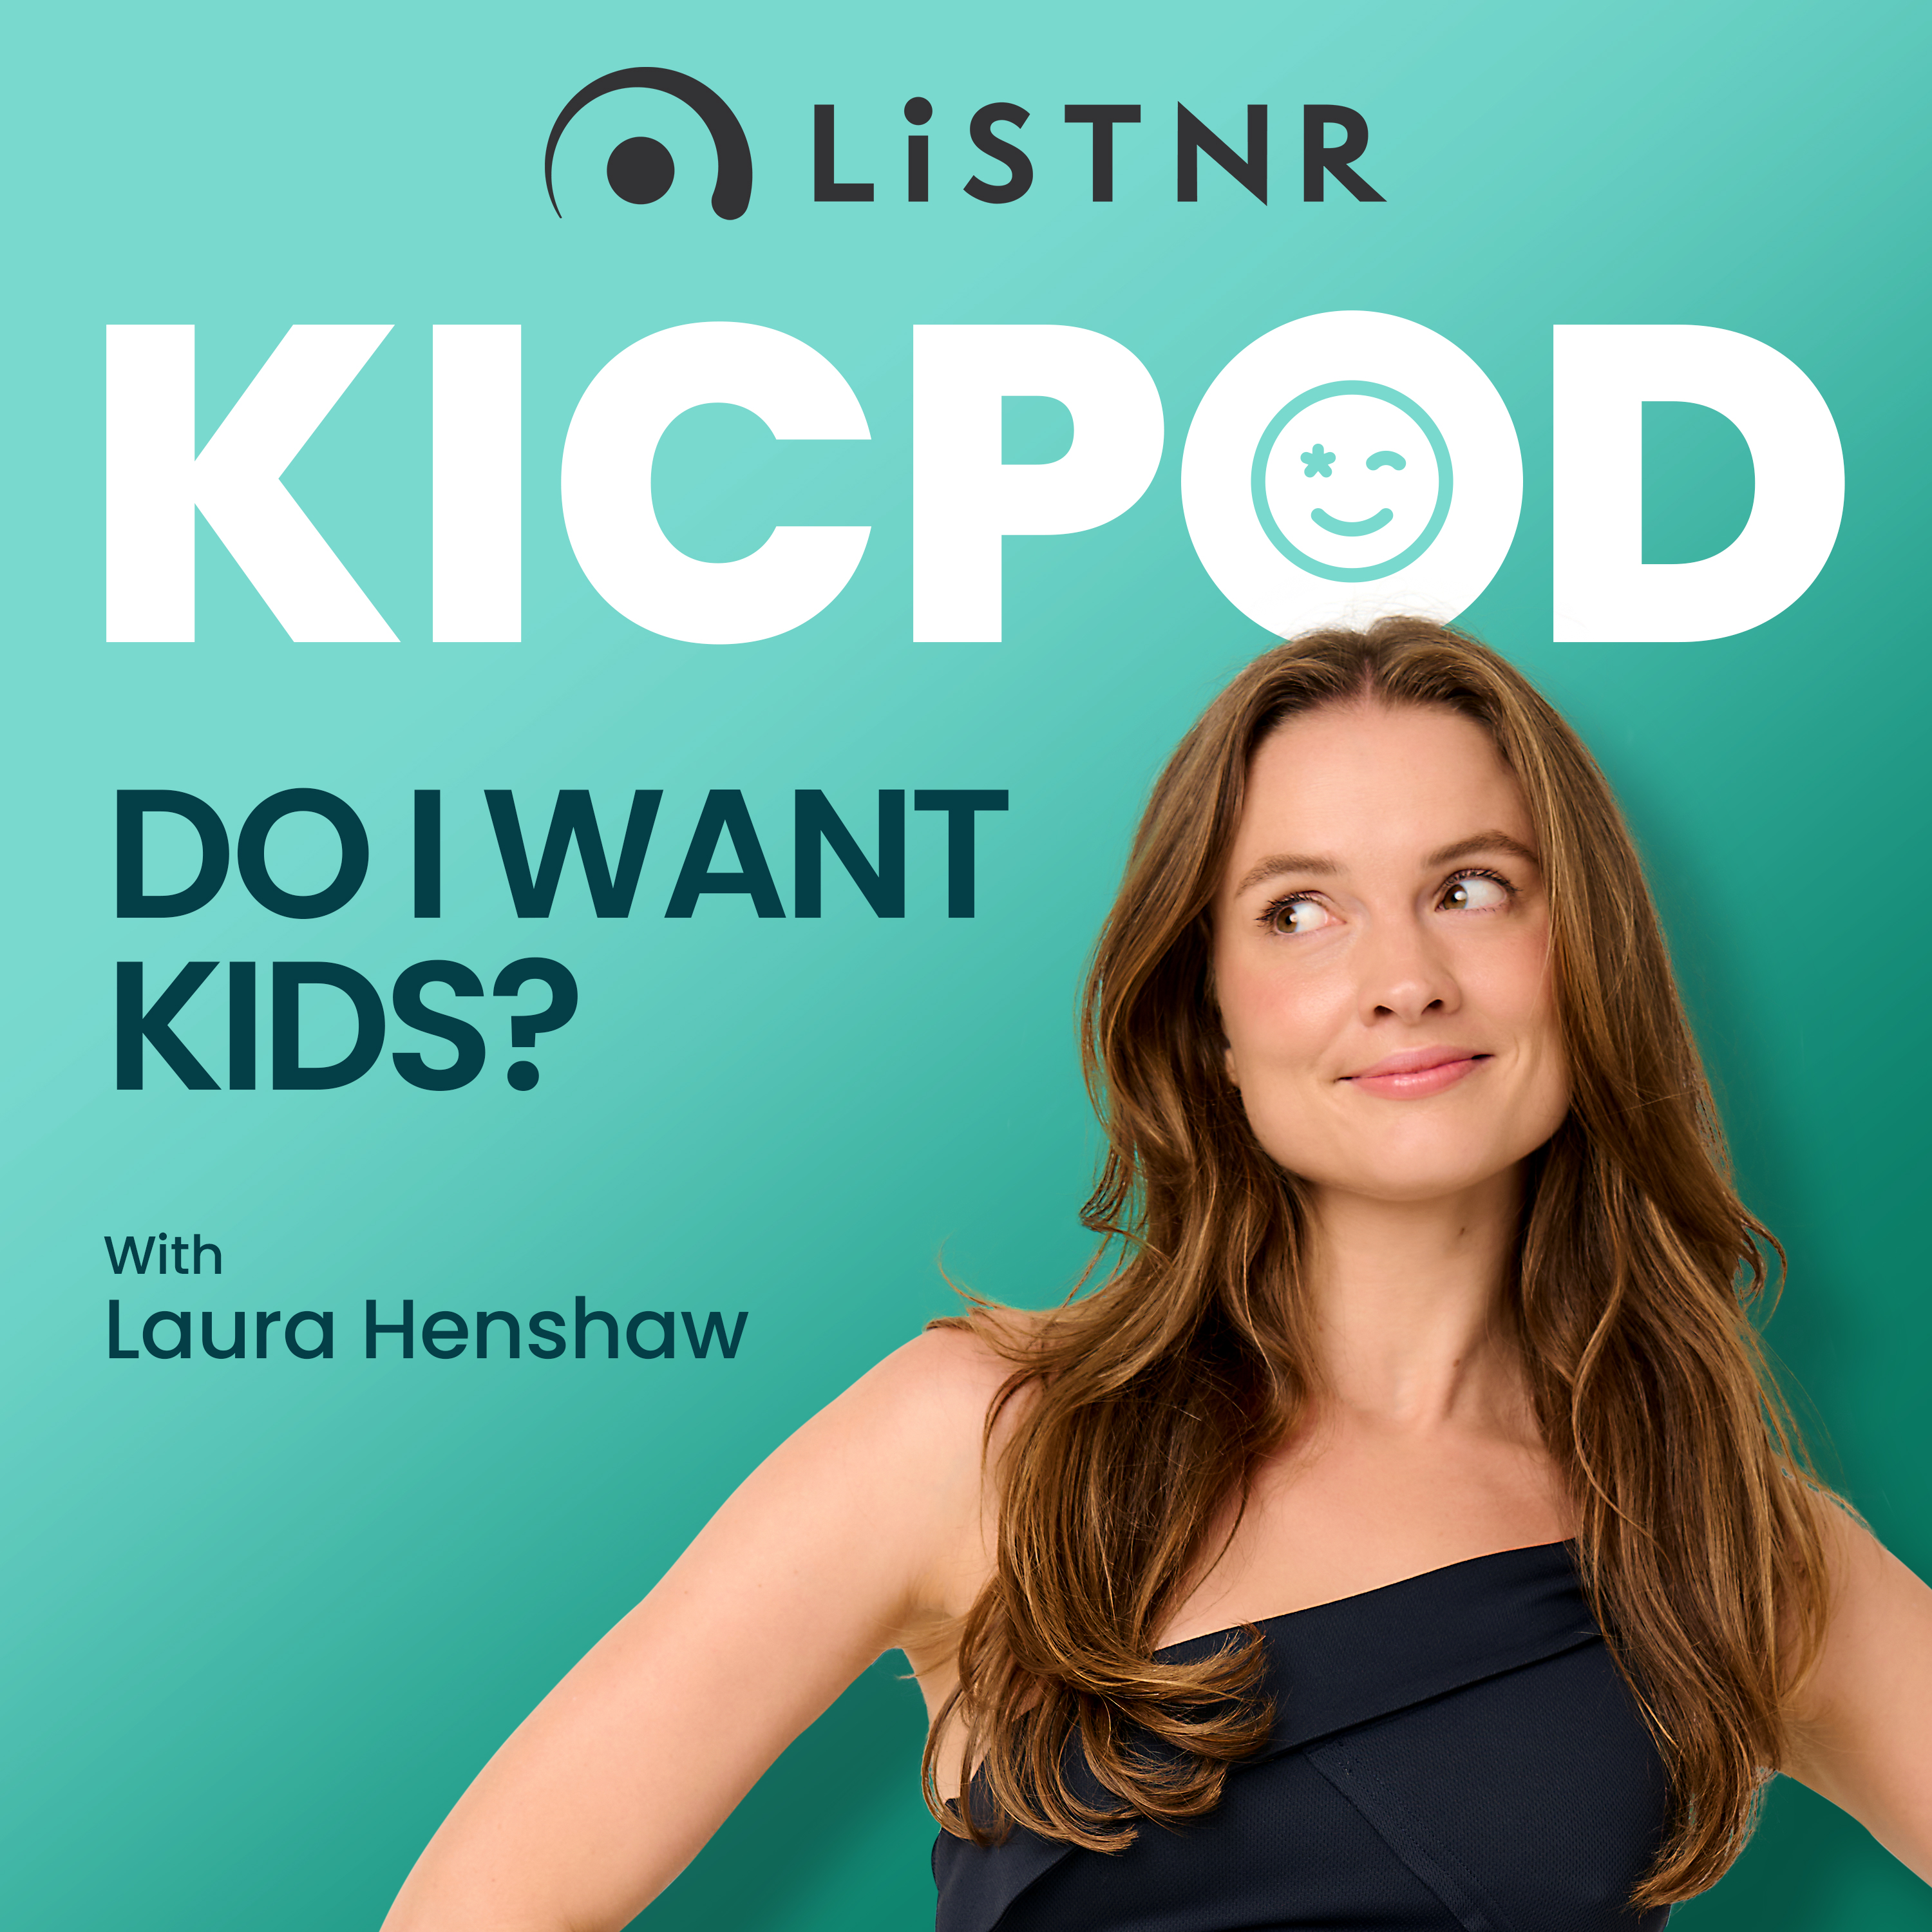 Do I want children or does society want me to have children? with Laura Henshaw